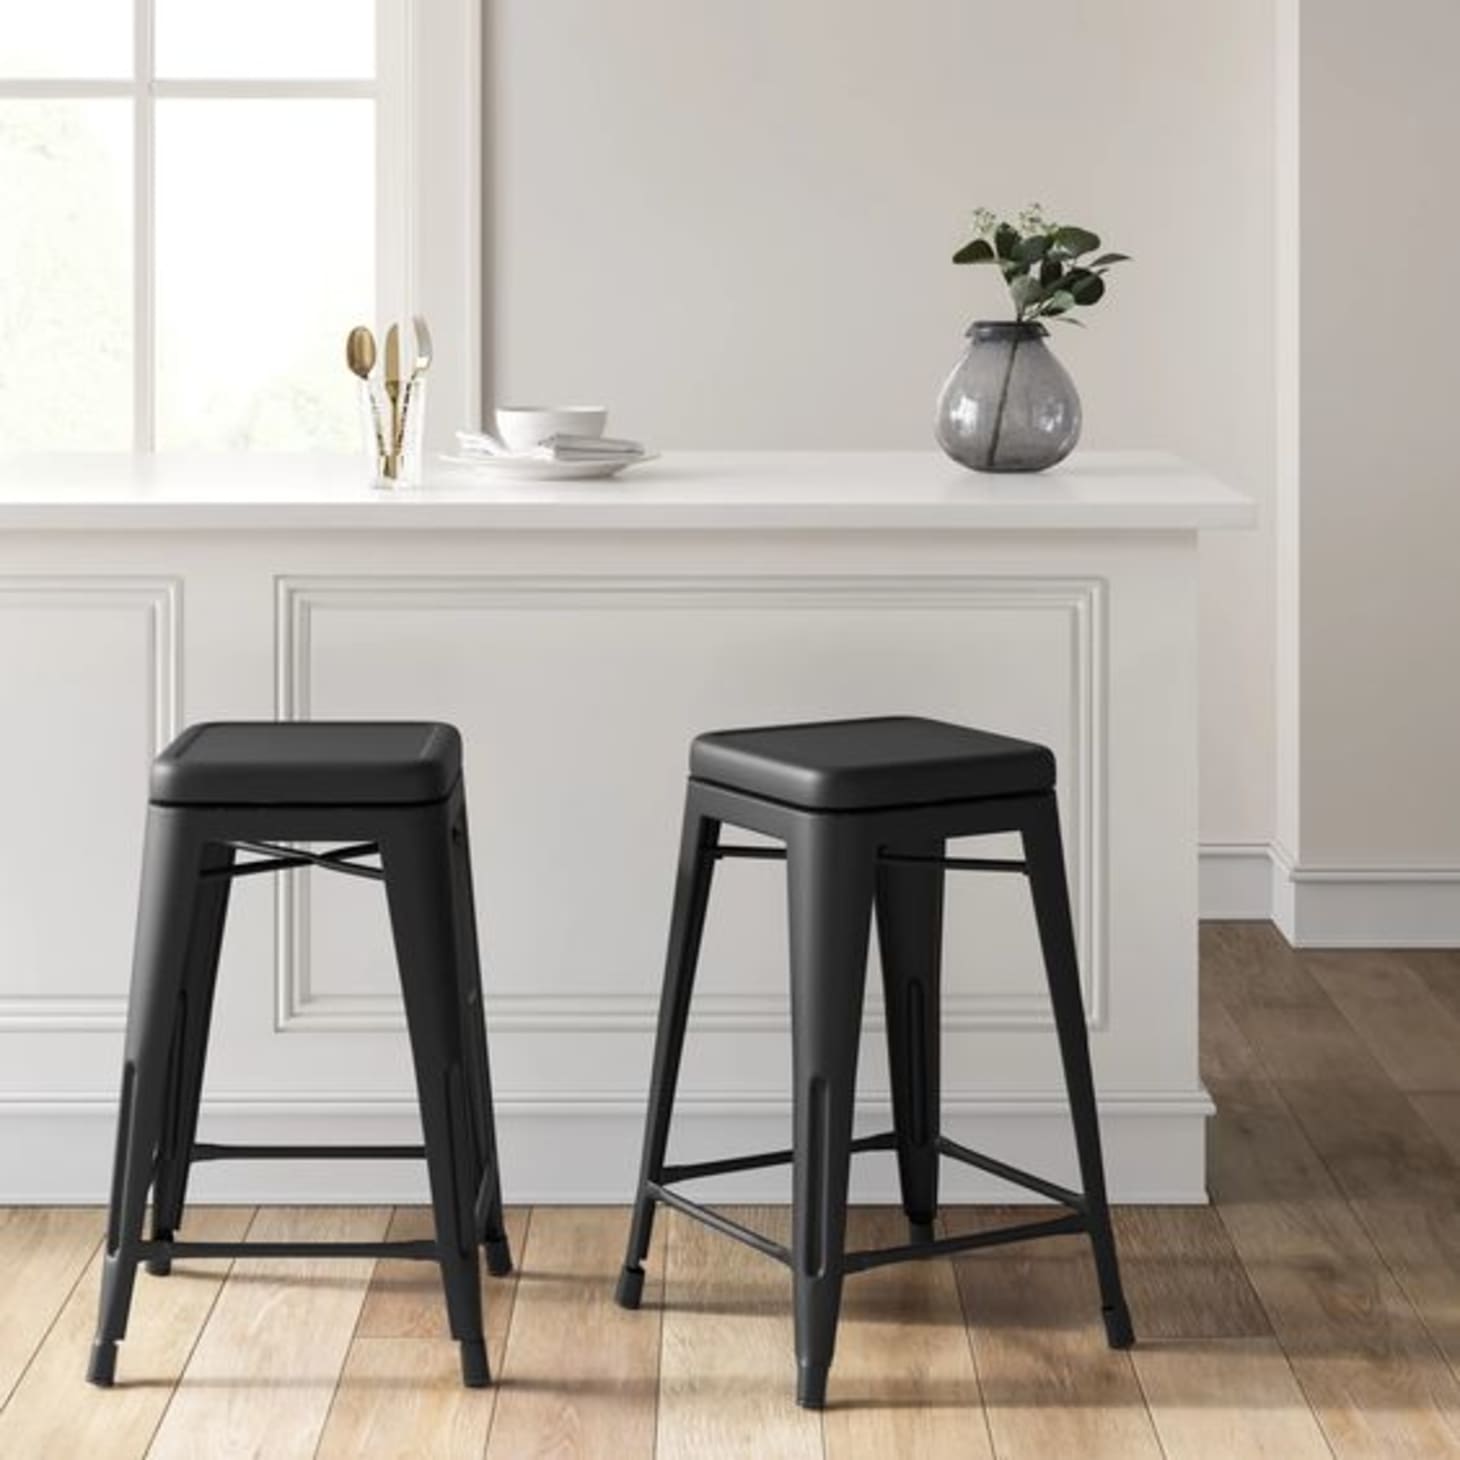 Target Dining Chair & Stool Sale - Home Deals April 2019 | Apartment